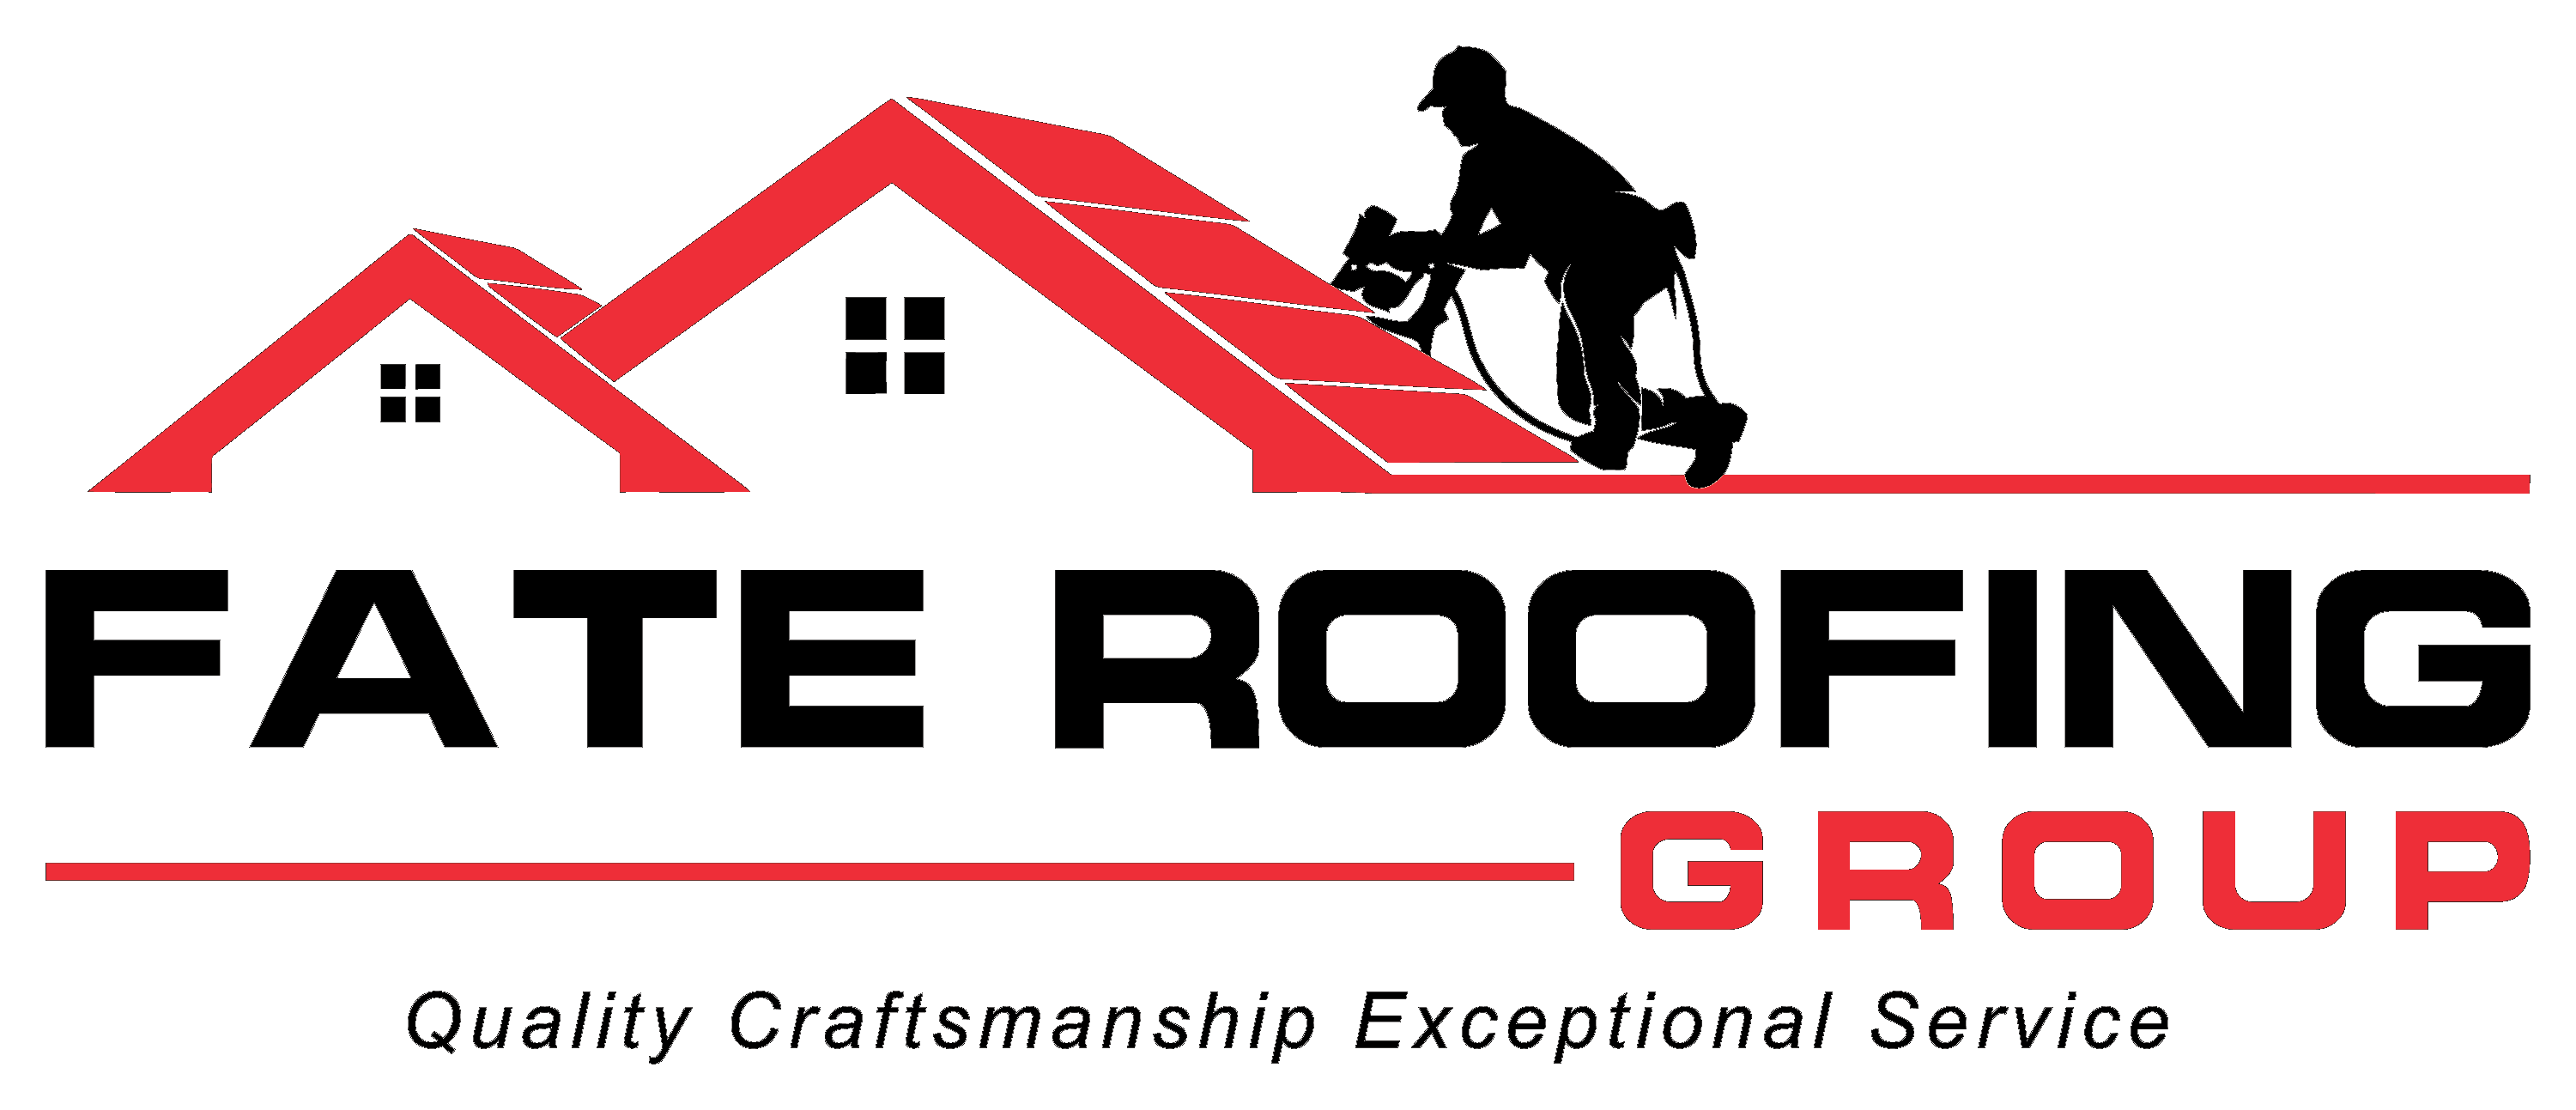 Fate Roofing Group black text